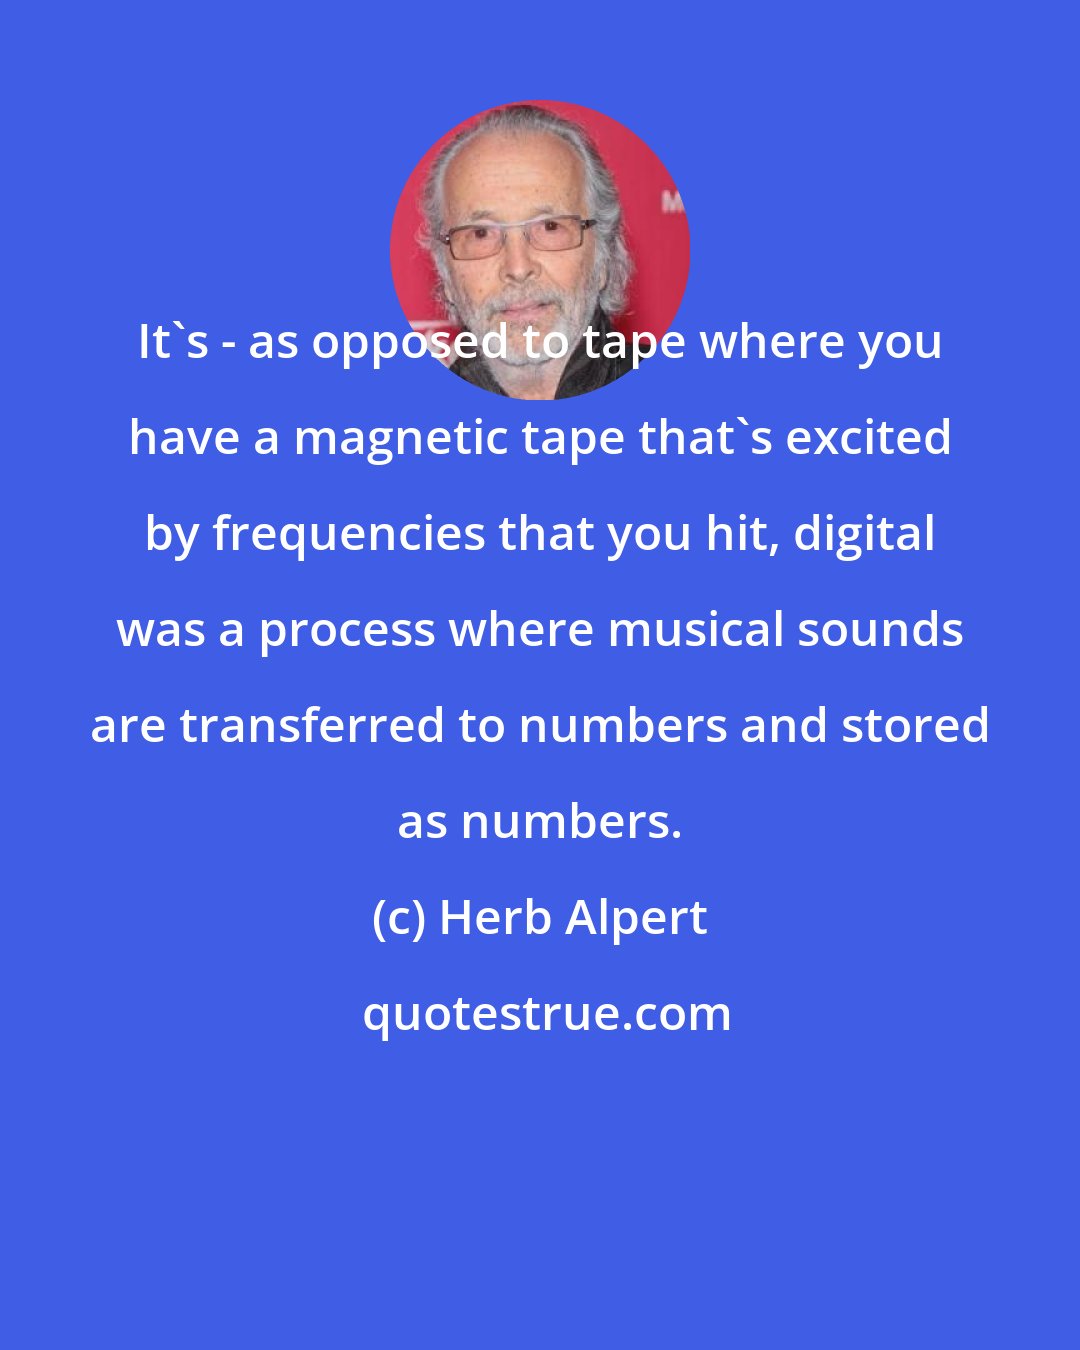 Herb Alpert: It's - as opposed to tape where you have a magnetic tape that's excited by frequencies that you hit, digital was a process where musical sounds are transferred to numbers and stored as numbers.